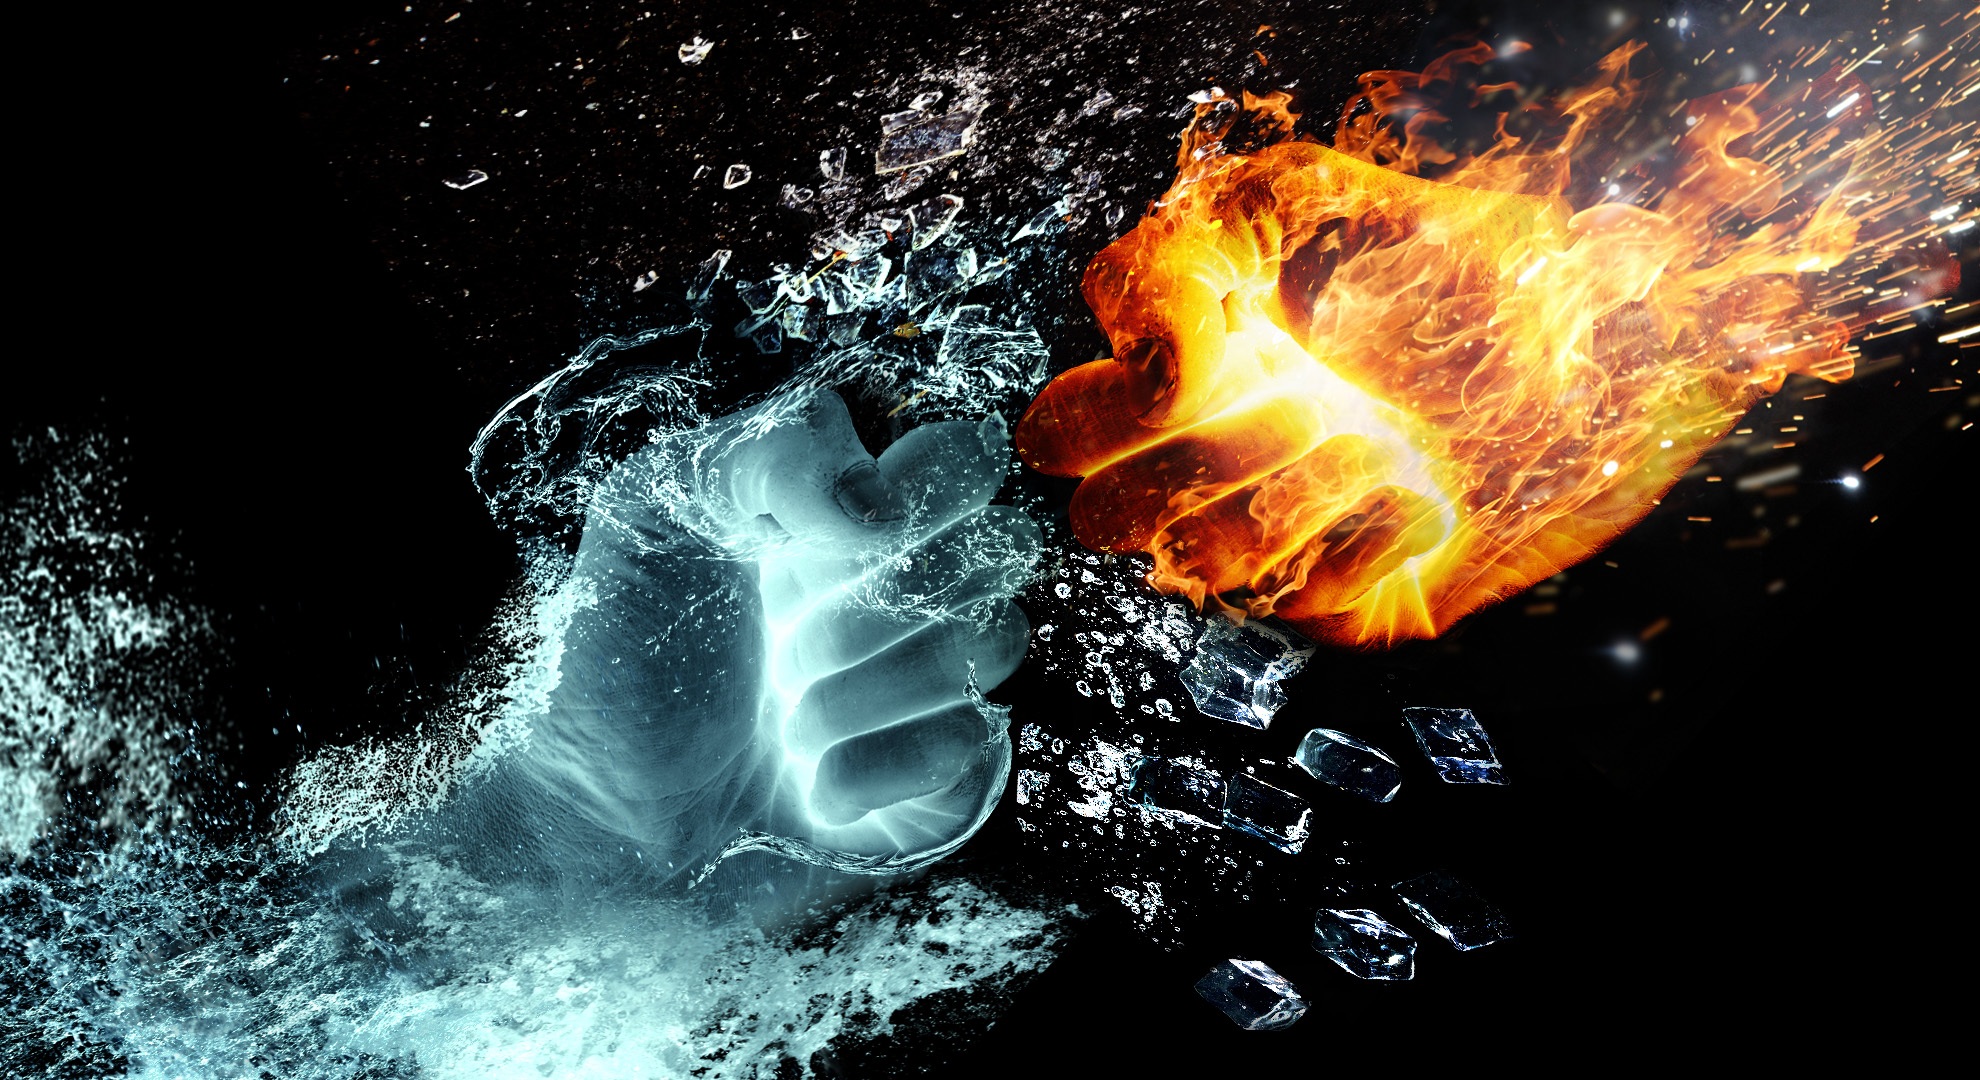 artistic, punch, fire, hand, ice